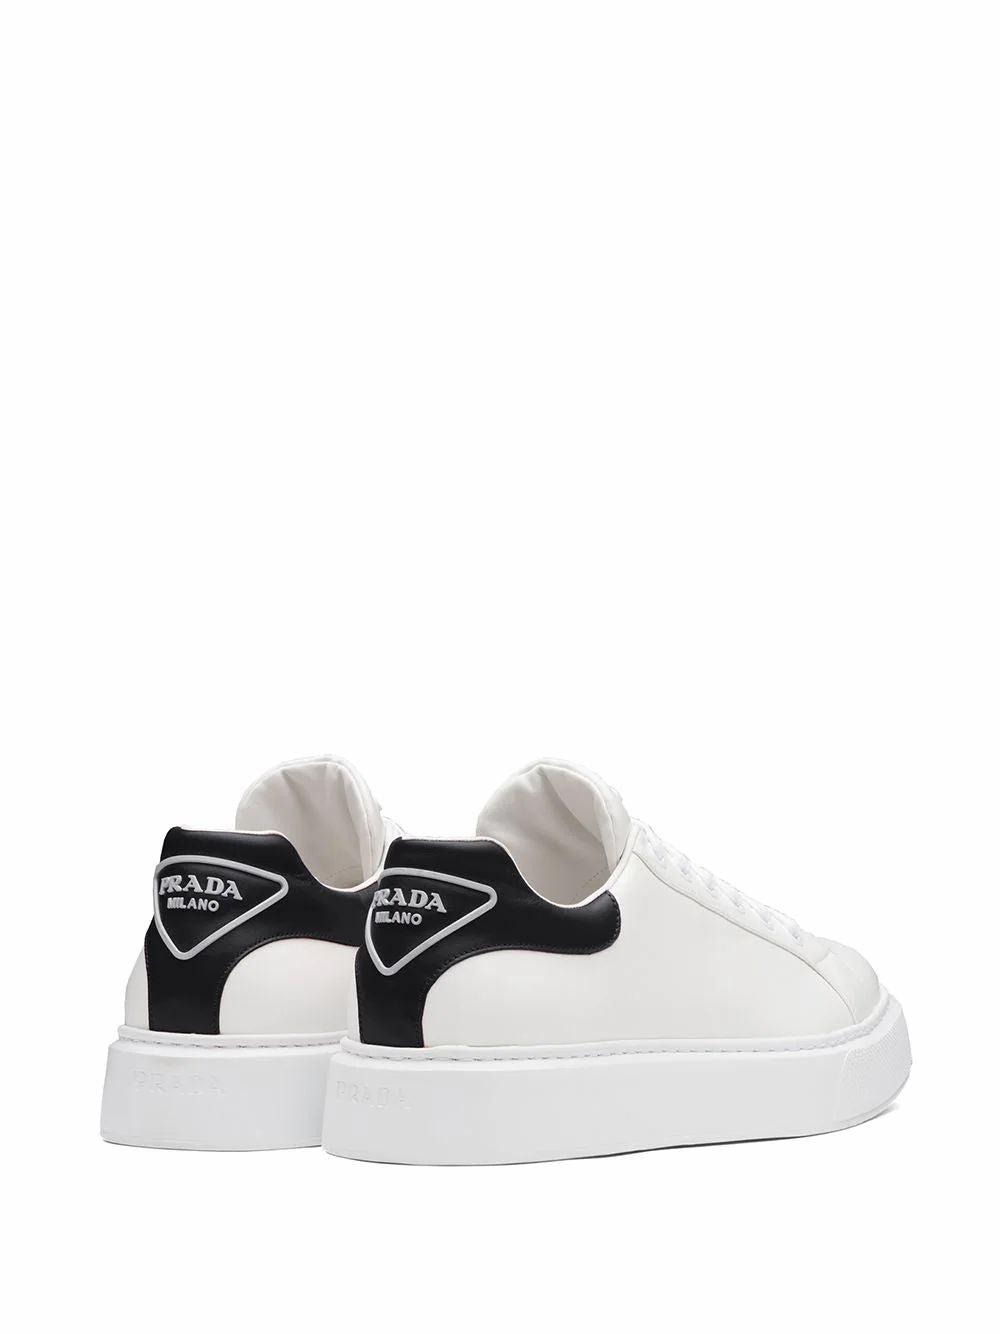 Prada Leather Sneakers in White for Men | Lyst